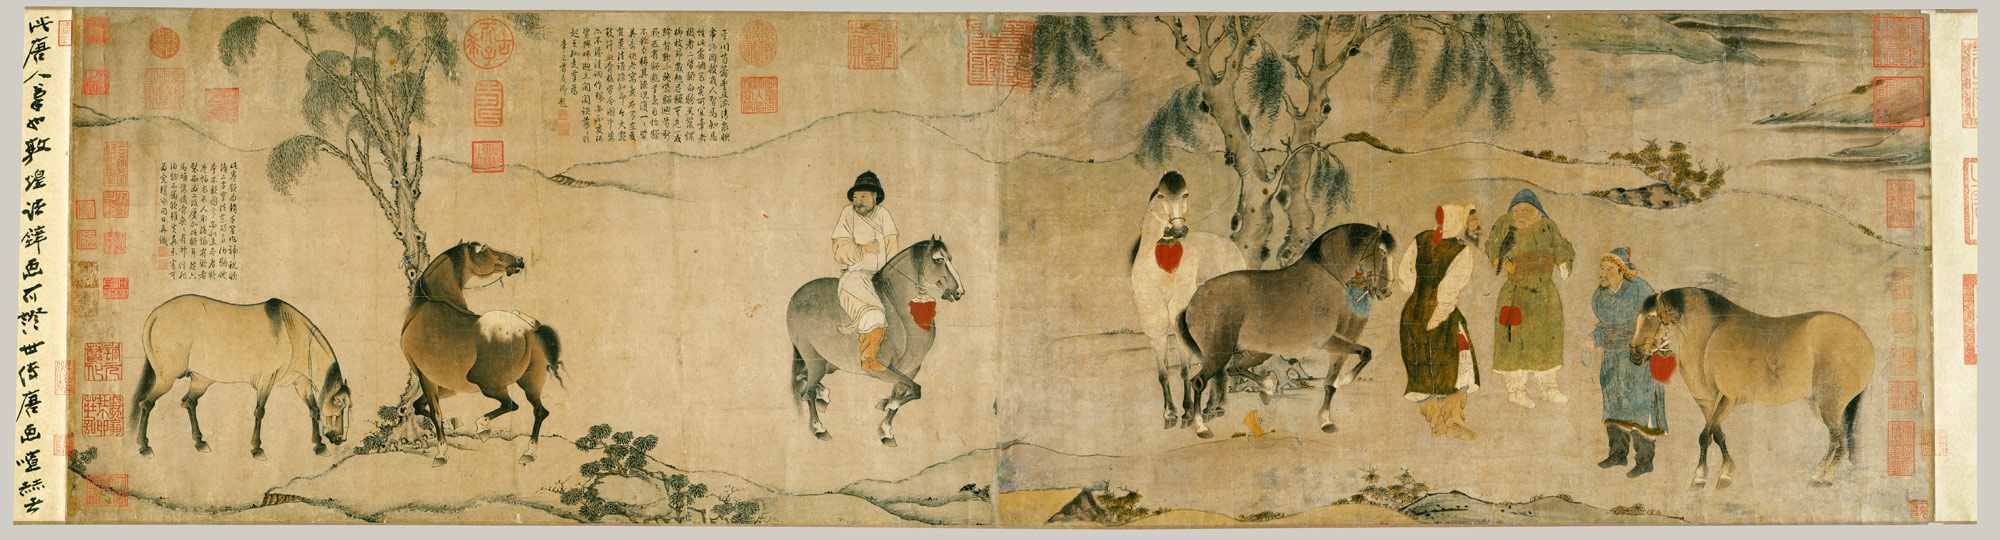 Six Horses, 13th–14th century, China, ink and color on paper, 47.1 x 647.1 cm (The Metropolitan Museum of Art, New York)